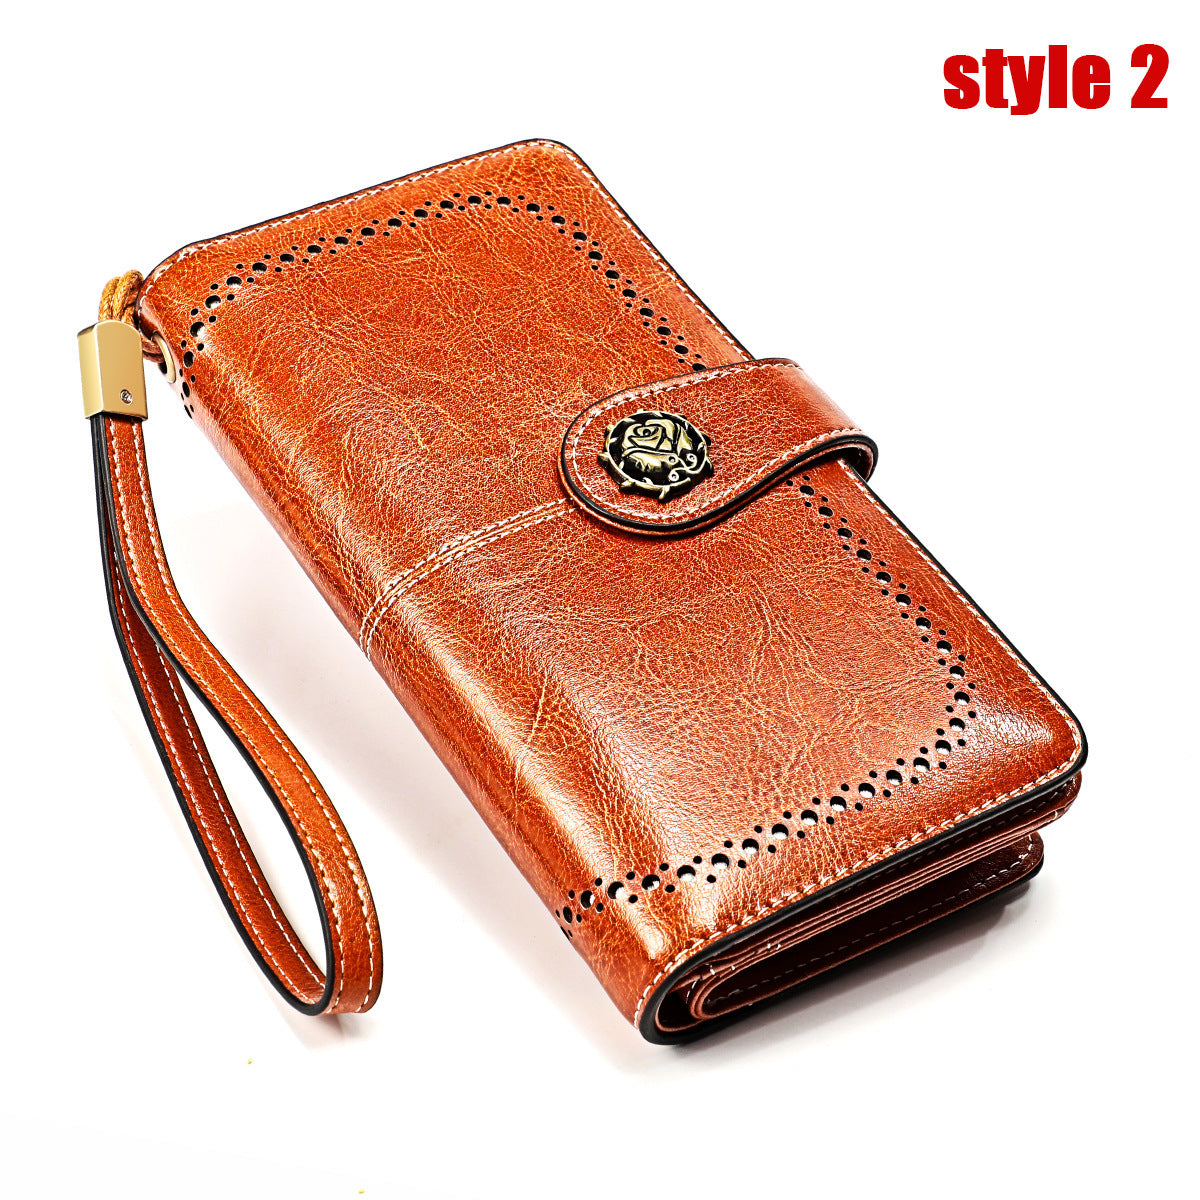 Large Capacity More Function Long Wallet Rfid Genuine Leather Women'S Wallets Purses For Women Black Brown Red